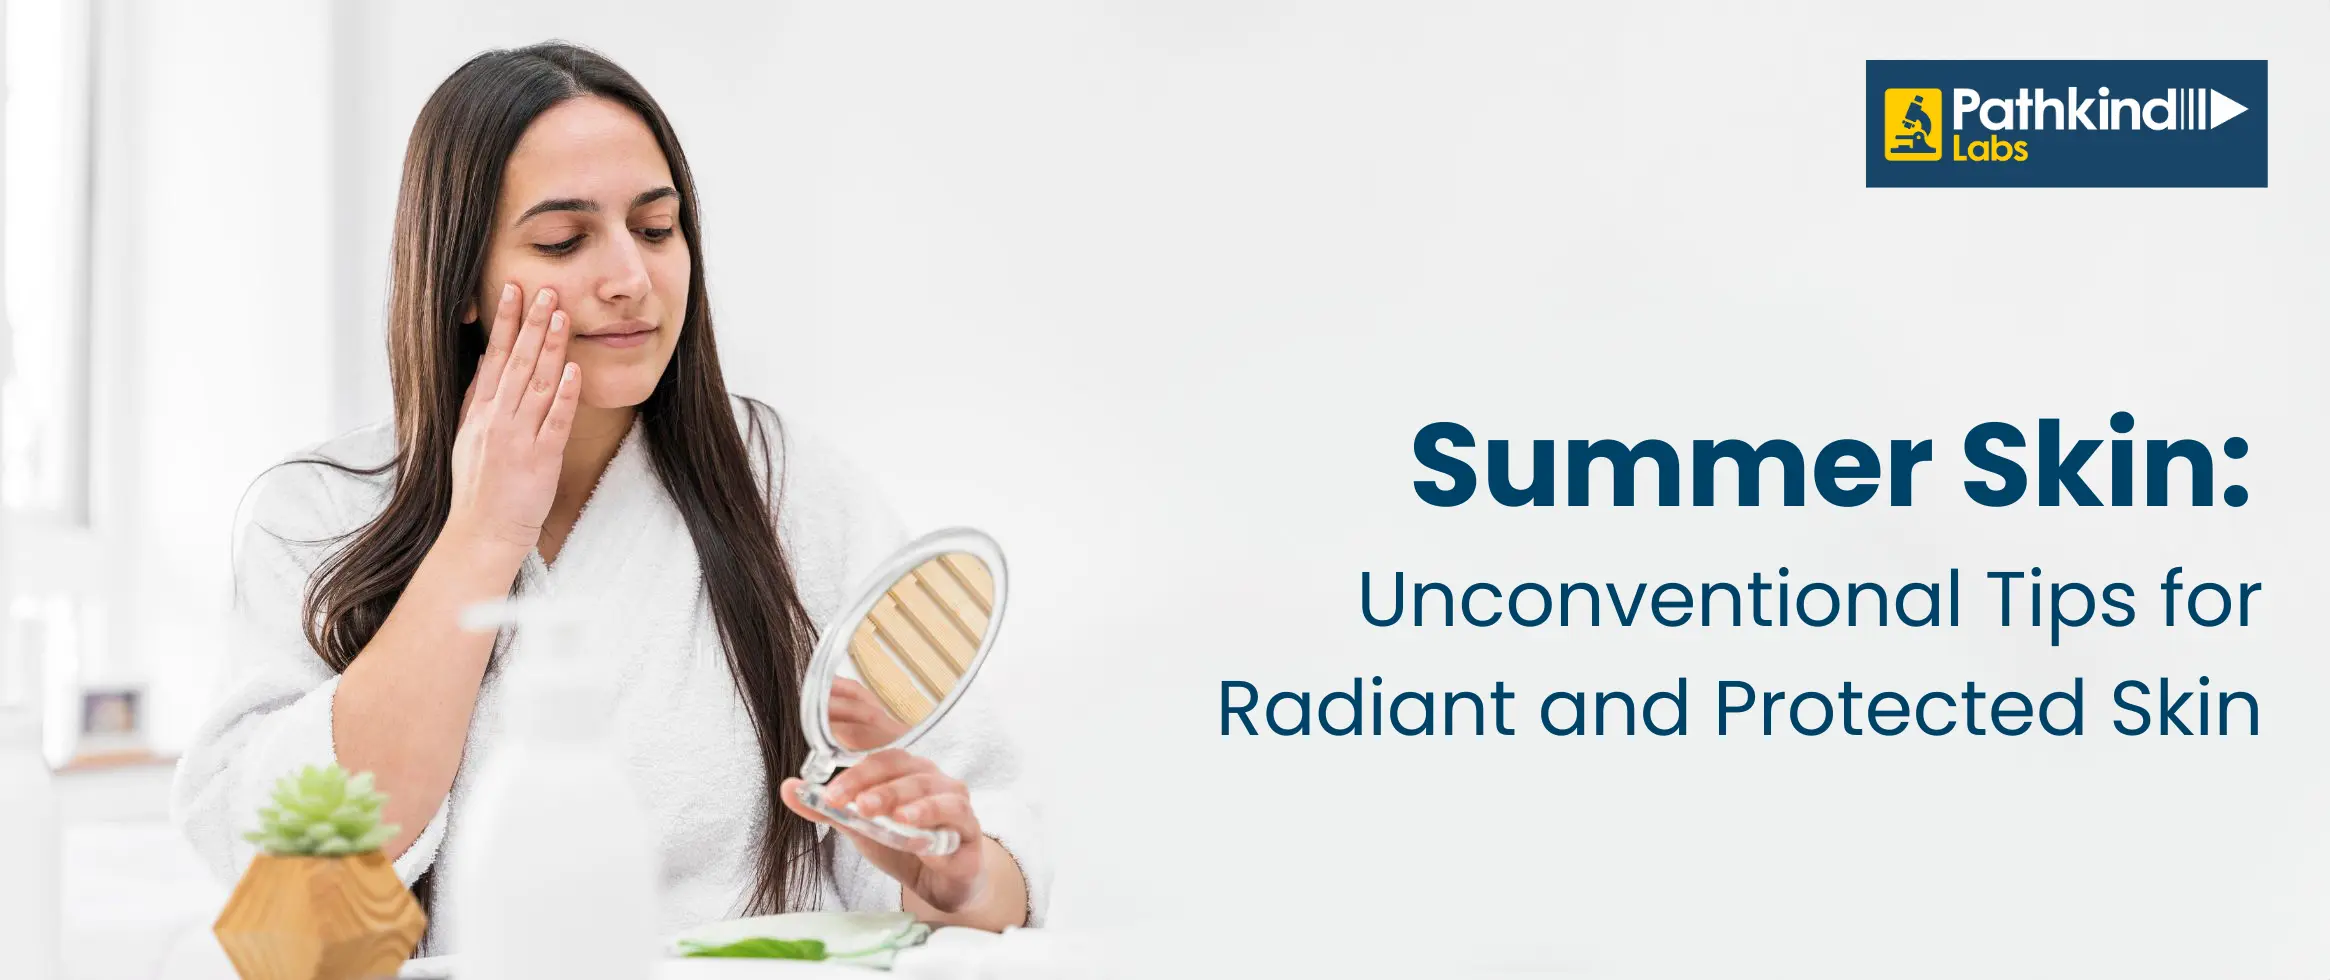  Summer Skin: Unconventional Tips for Radiant and Protected Skin